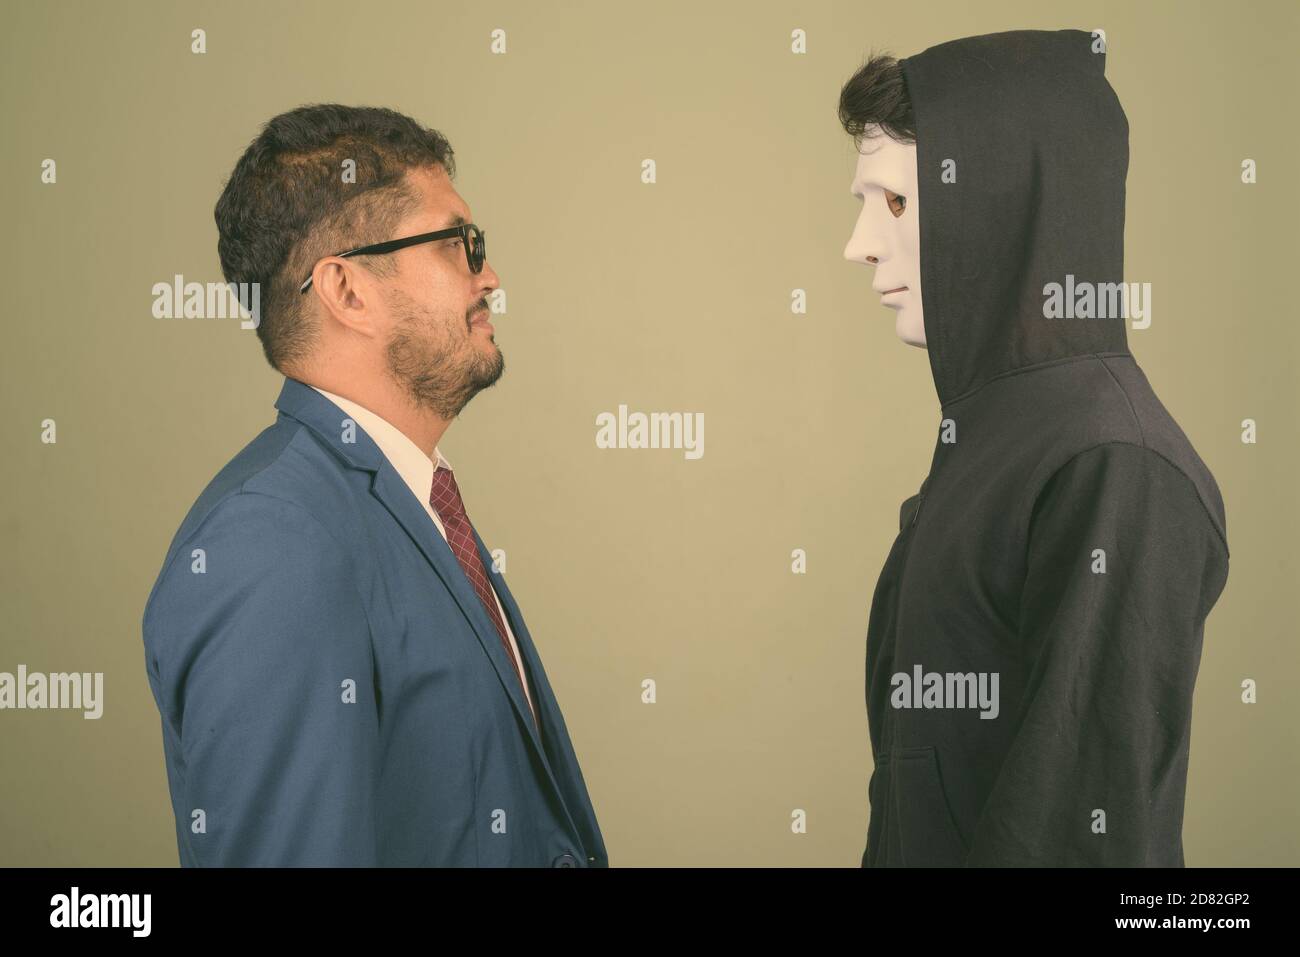 Bearded Persian businessman and young Indian man against colored background Stock Photo